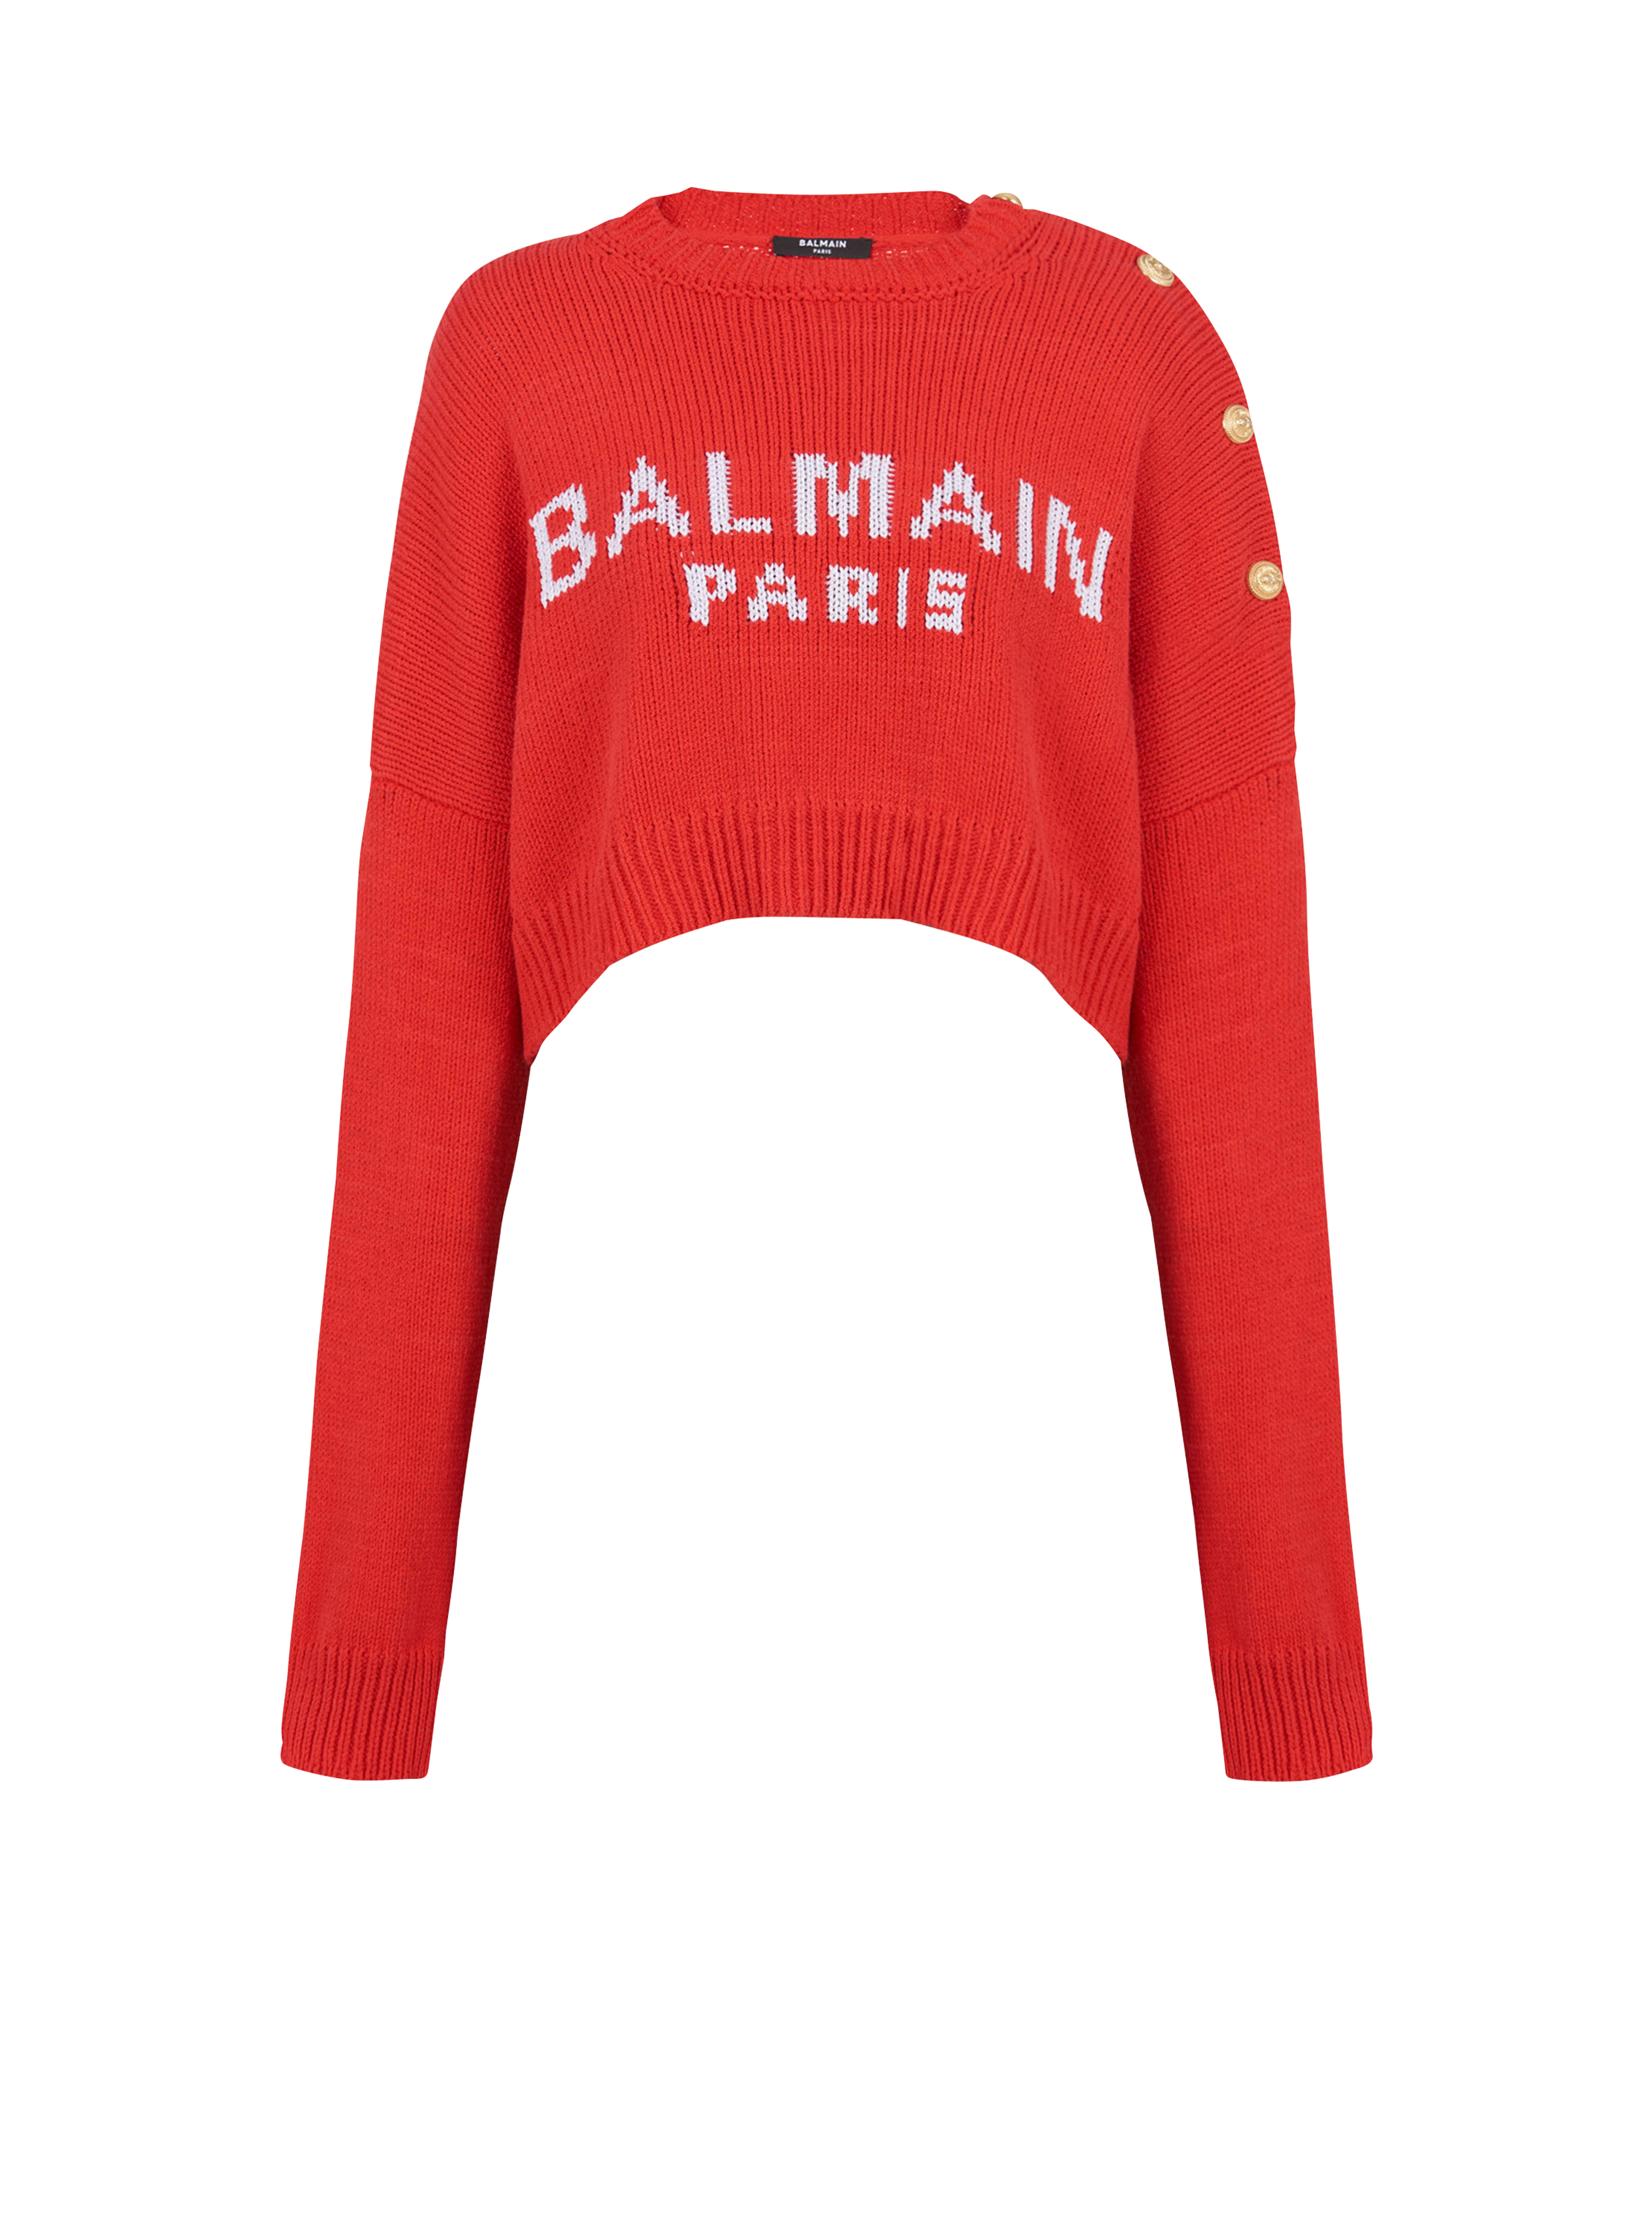 HIGH SUMMER CAPSULE - Cropped knit sweater with Balmain logo print, red, hi-res